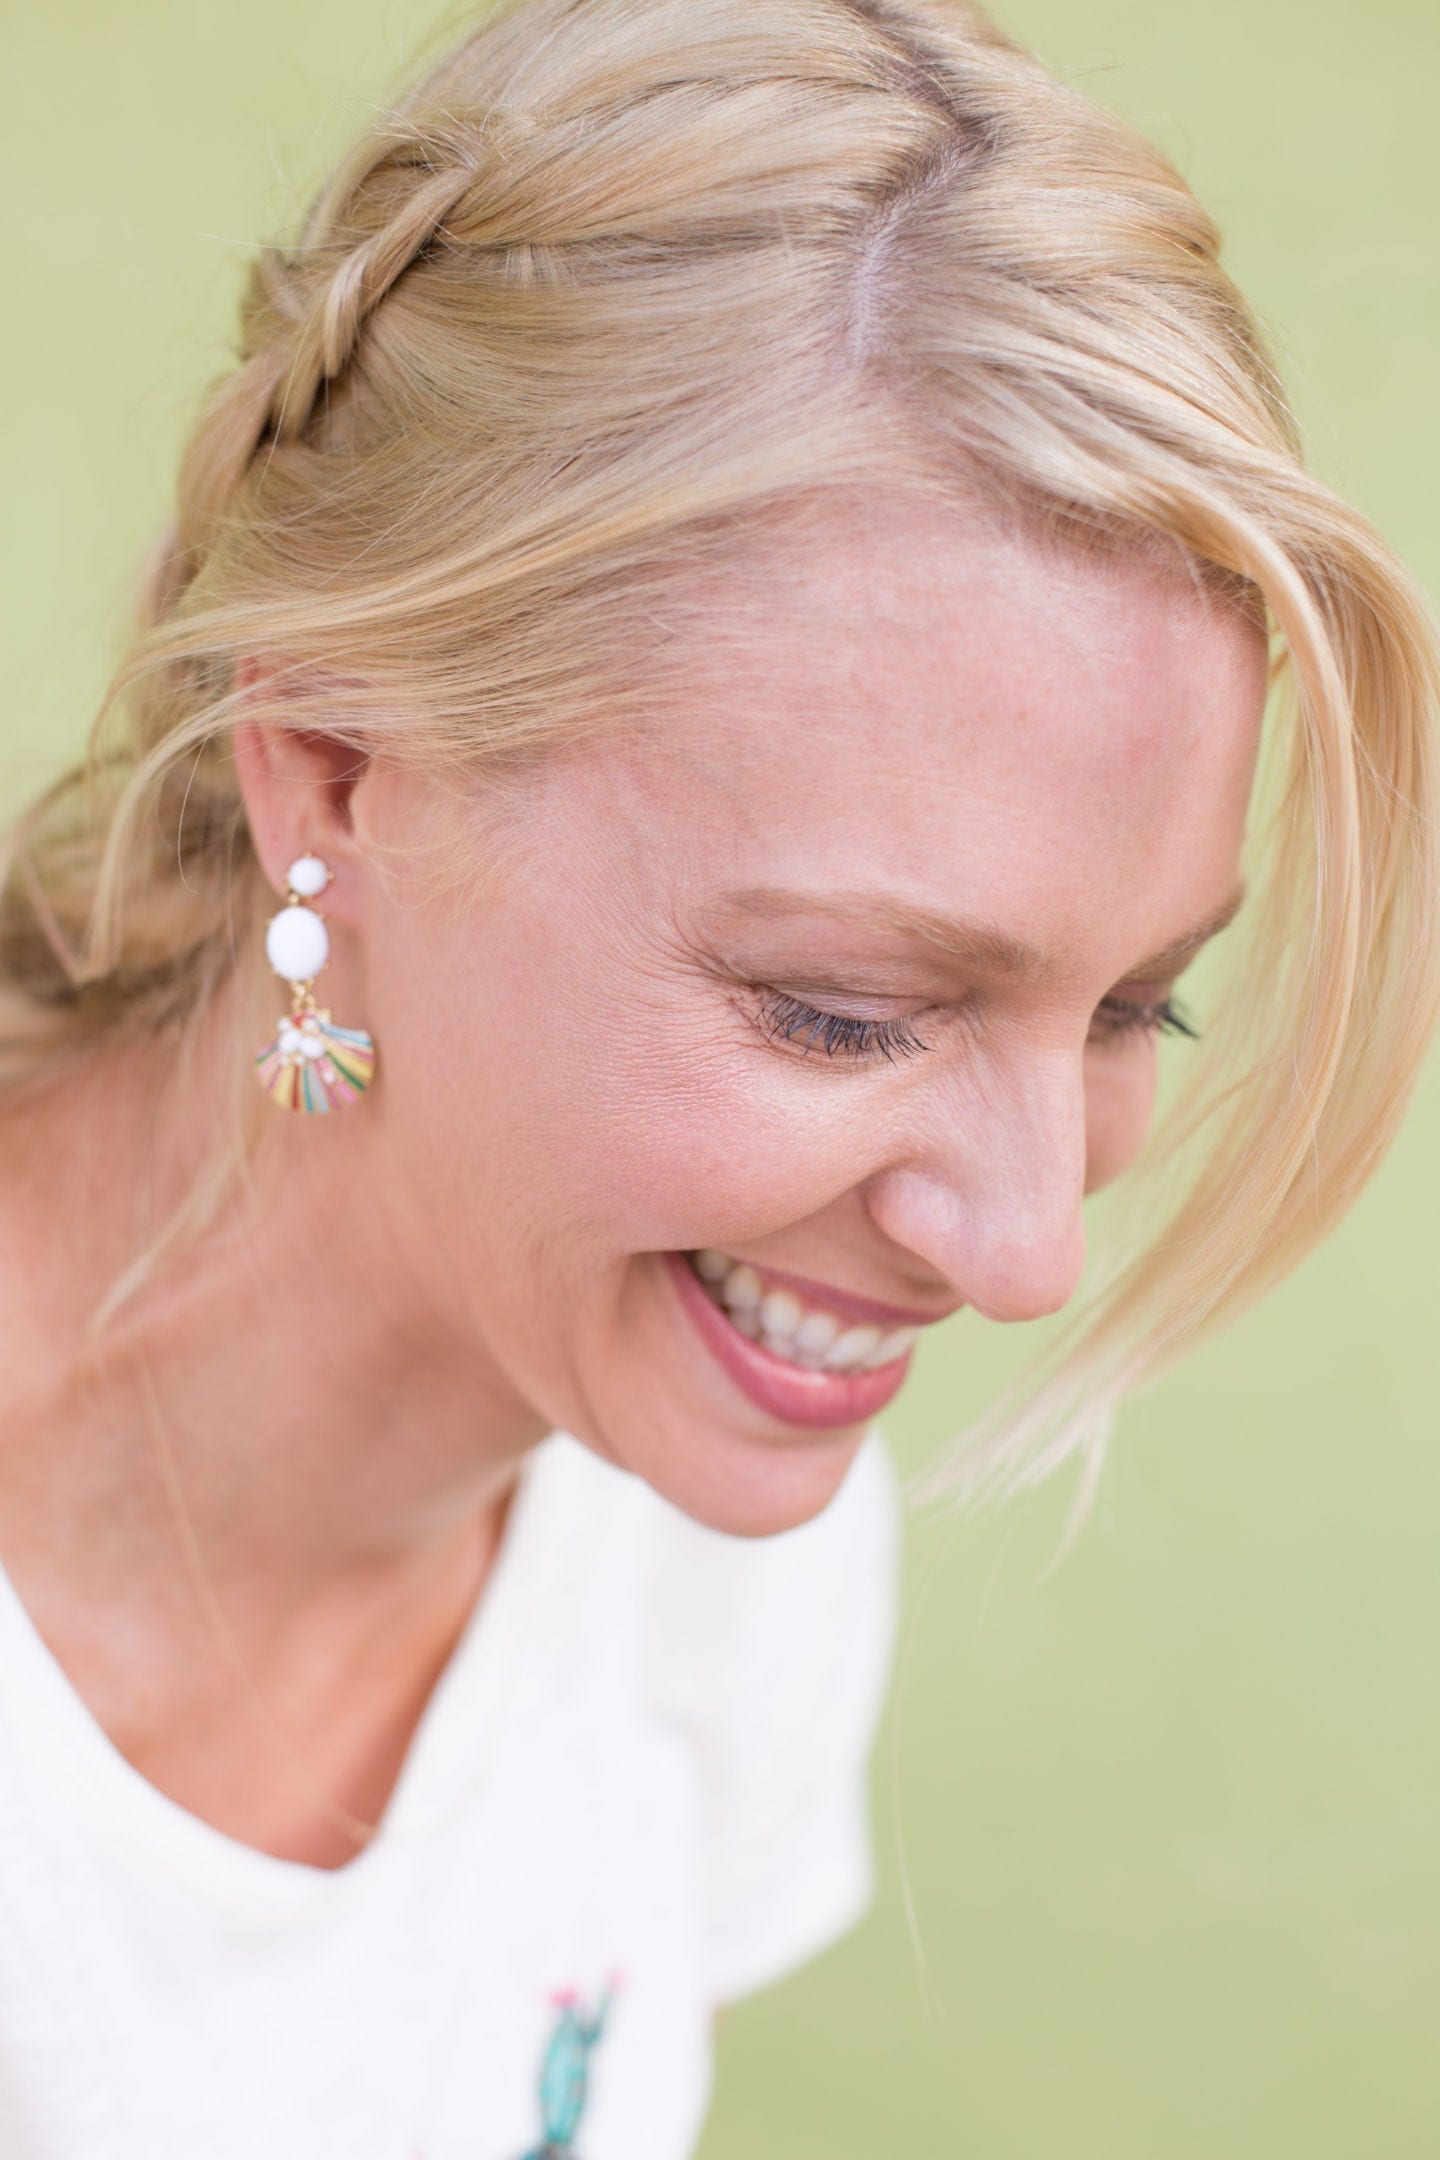 Talbots jewelry. Earrings in colorful summer hues.